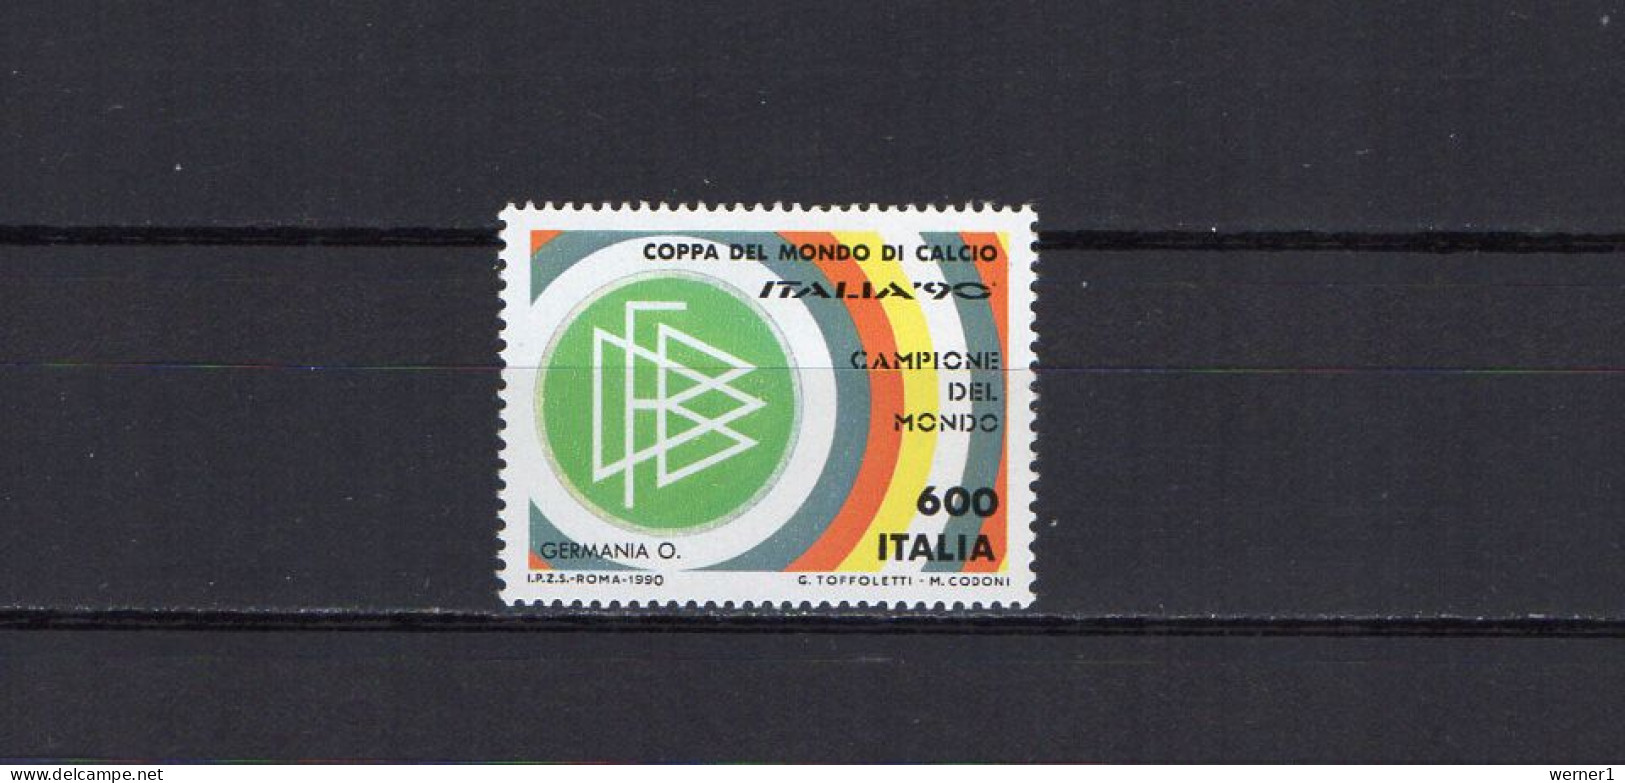 Italy 1990 Football Soccer World Cup Stamp MNH - 1990 – Italië